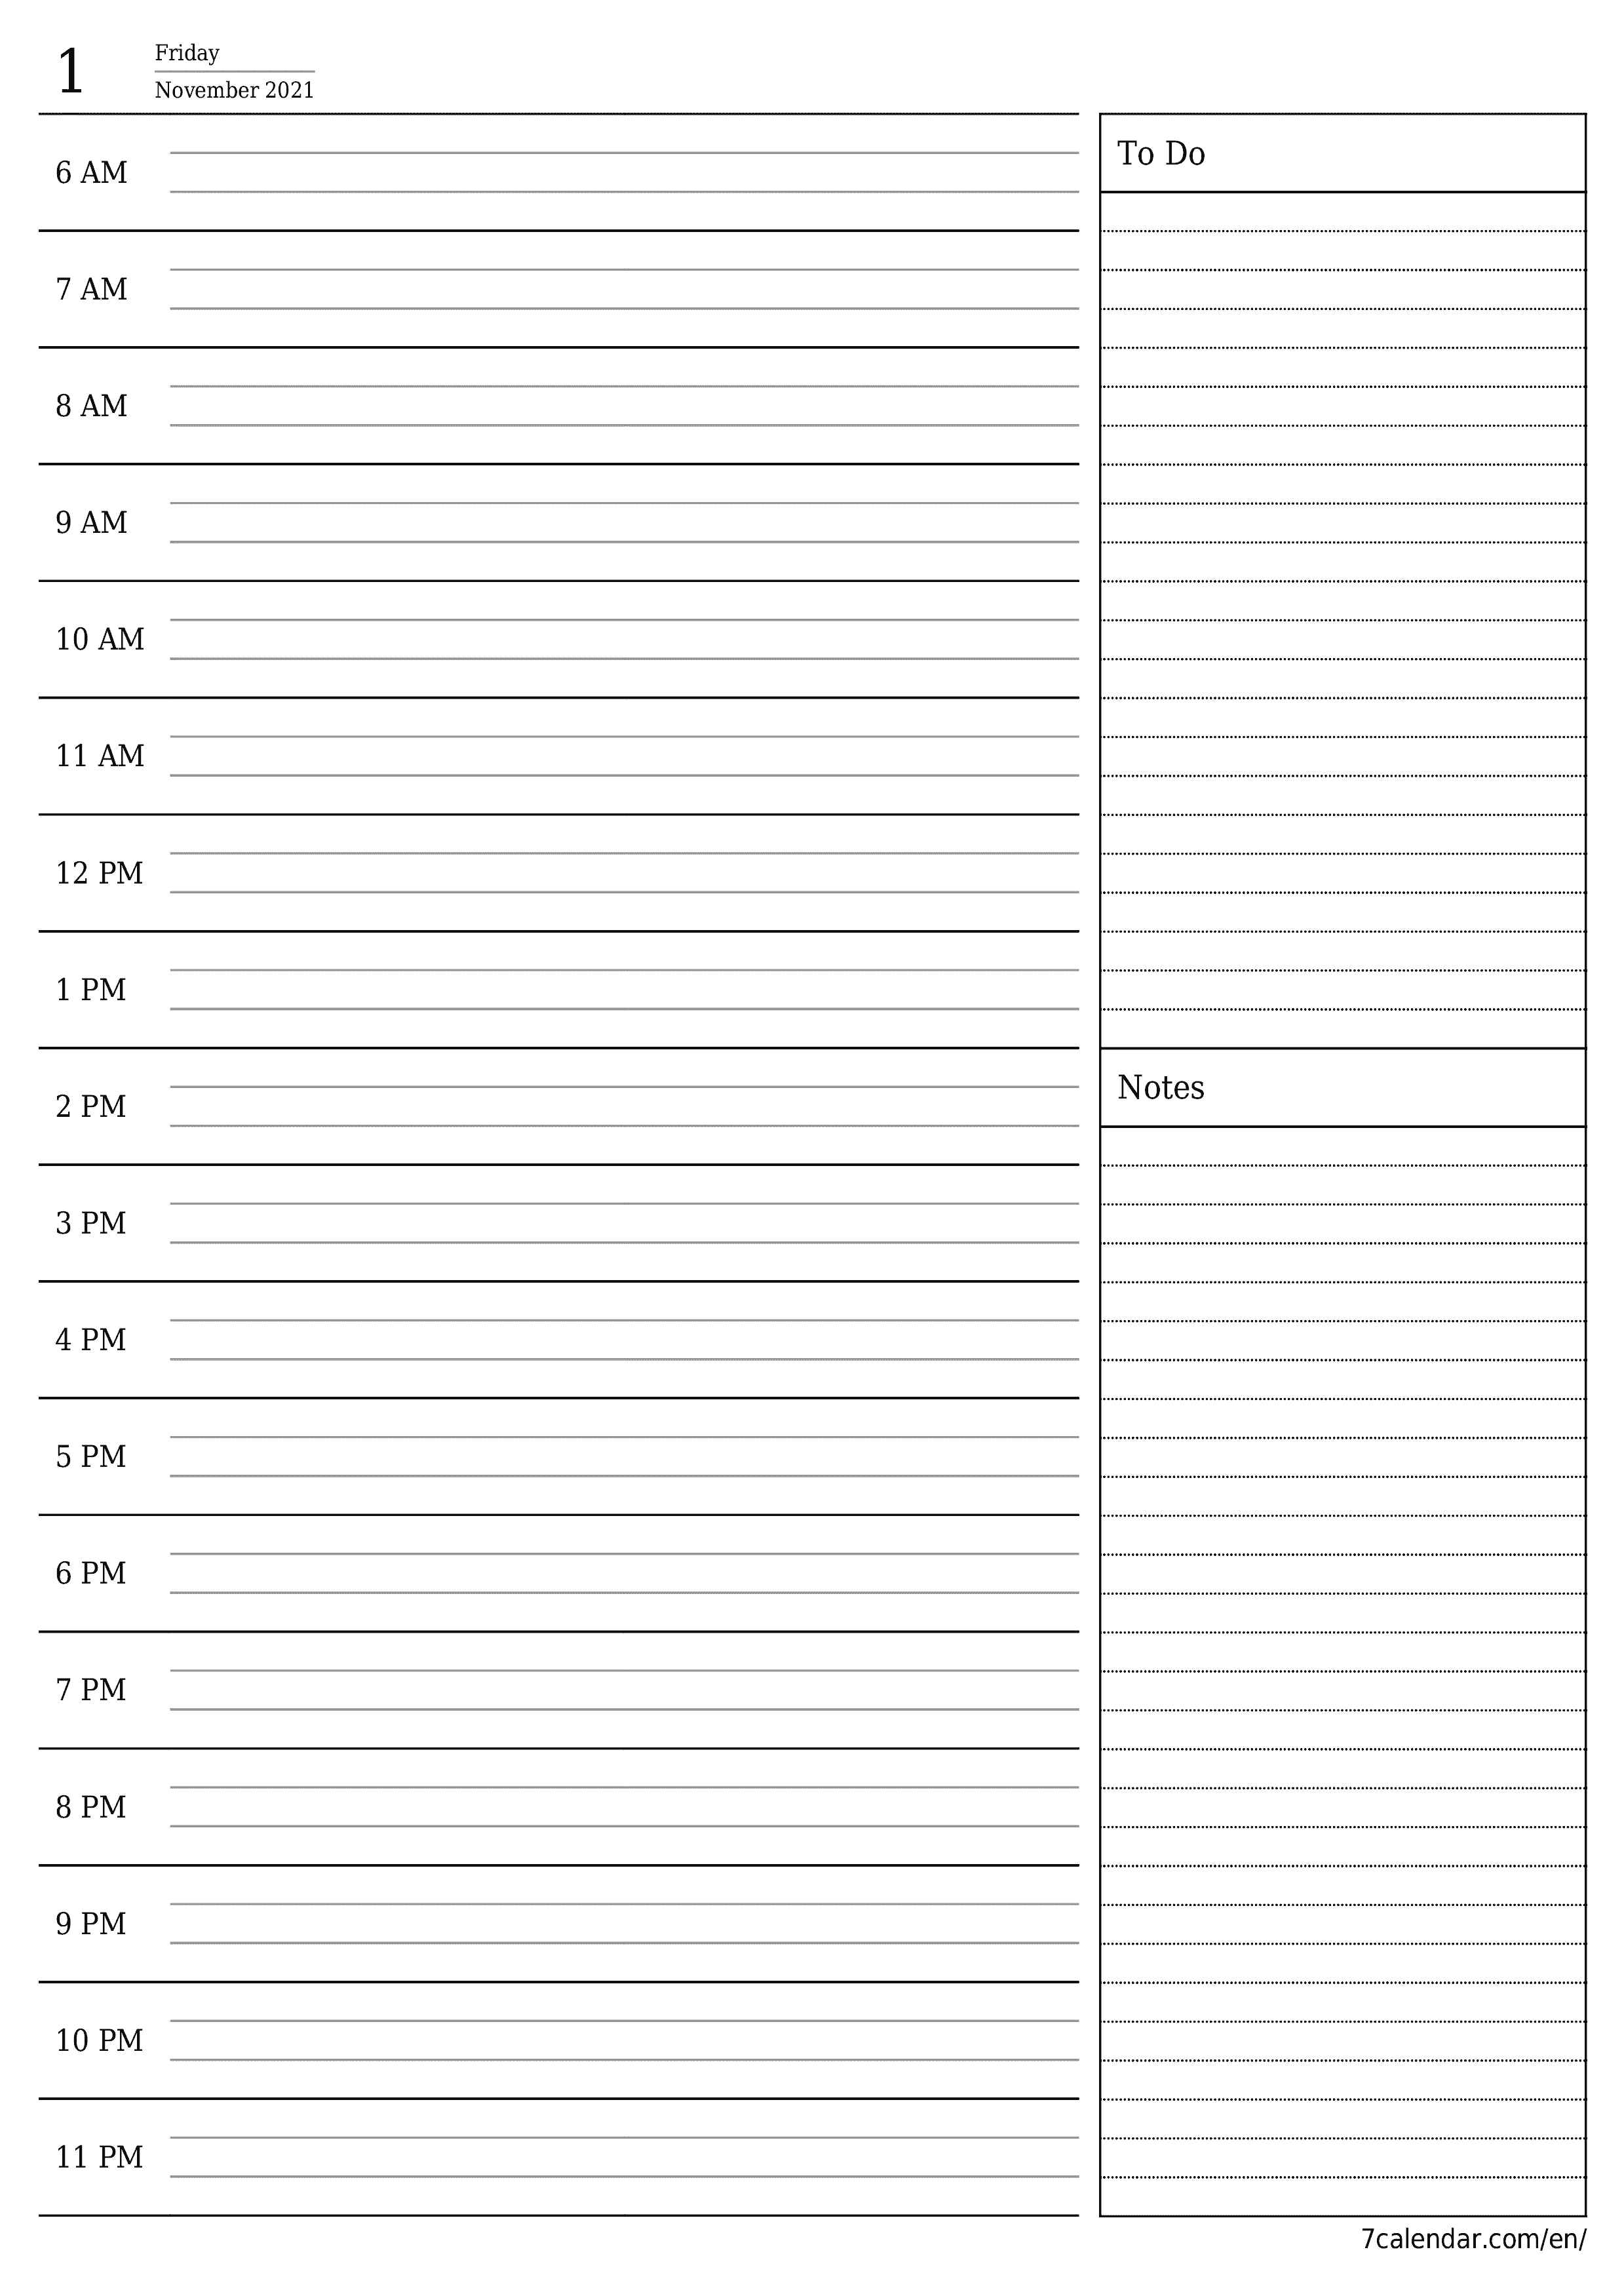 Blank daily printable calendar and planner for day November 2021 with notes, save and print to PDF PNG English - 7calendar.com